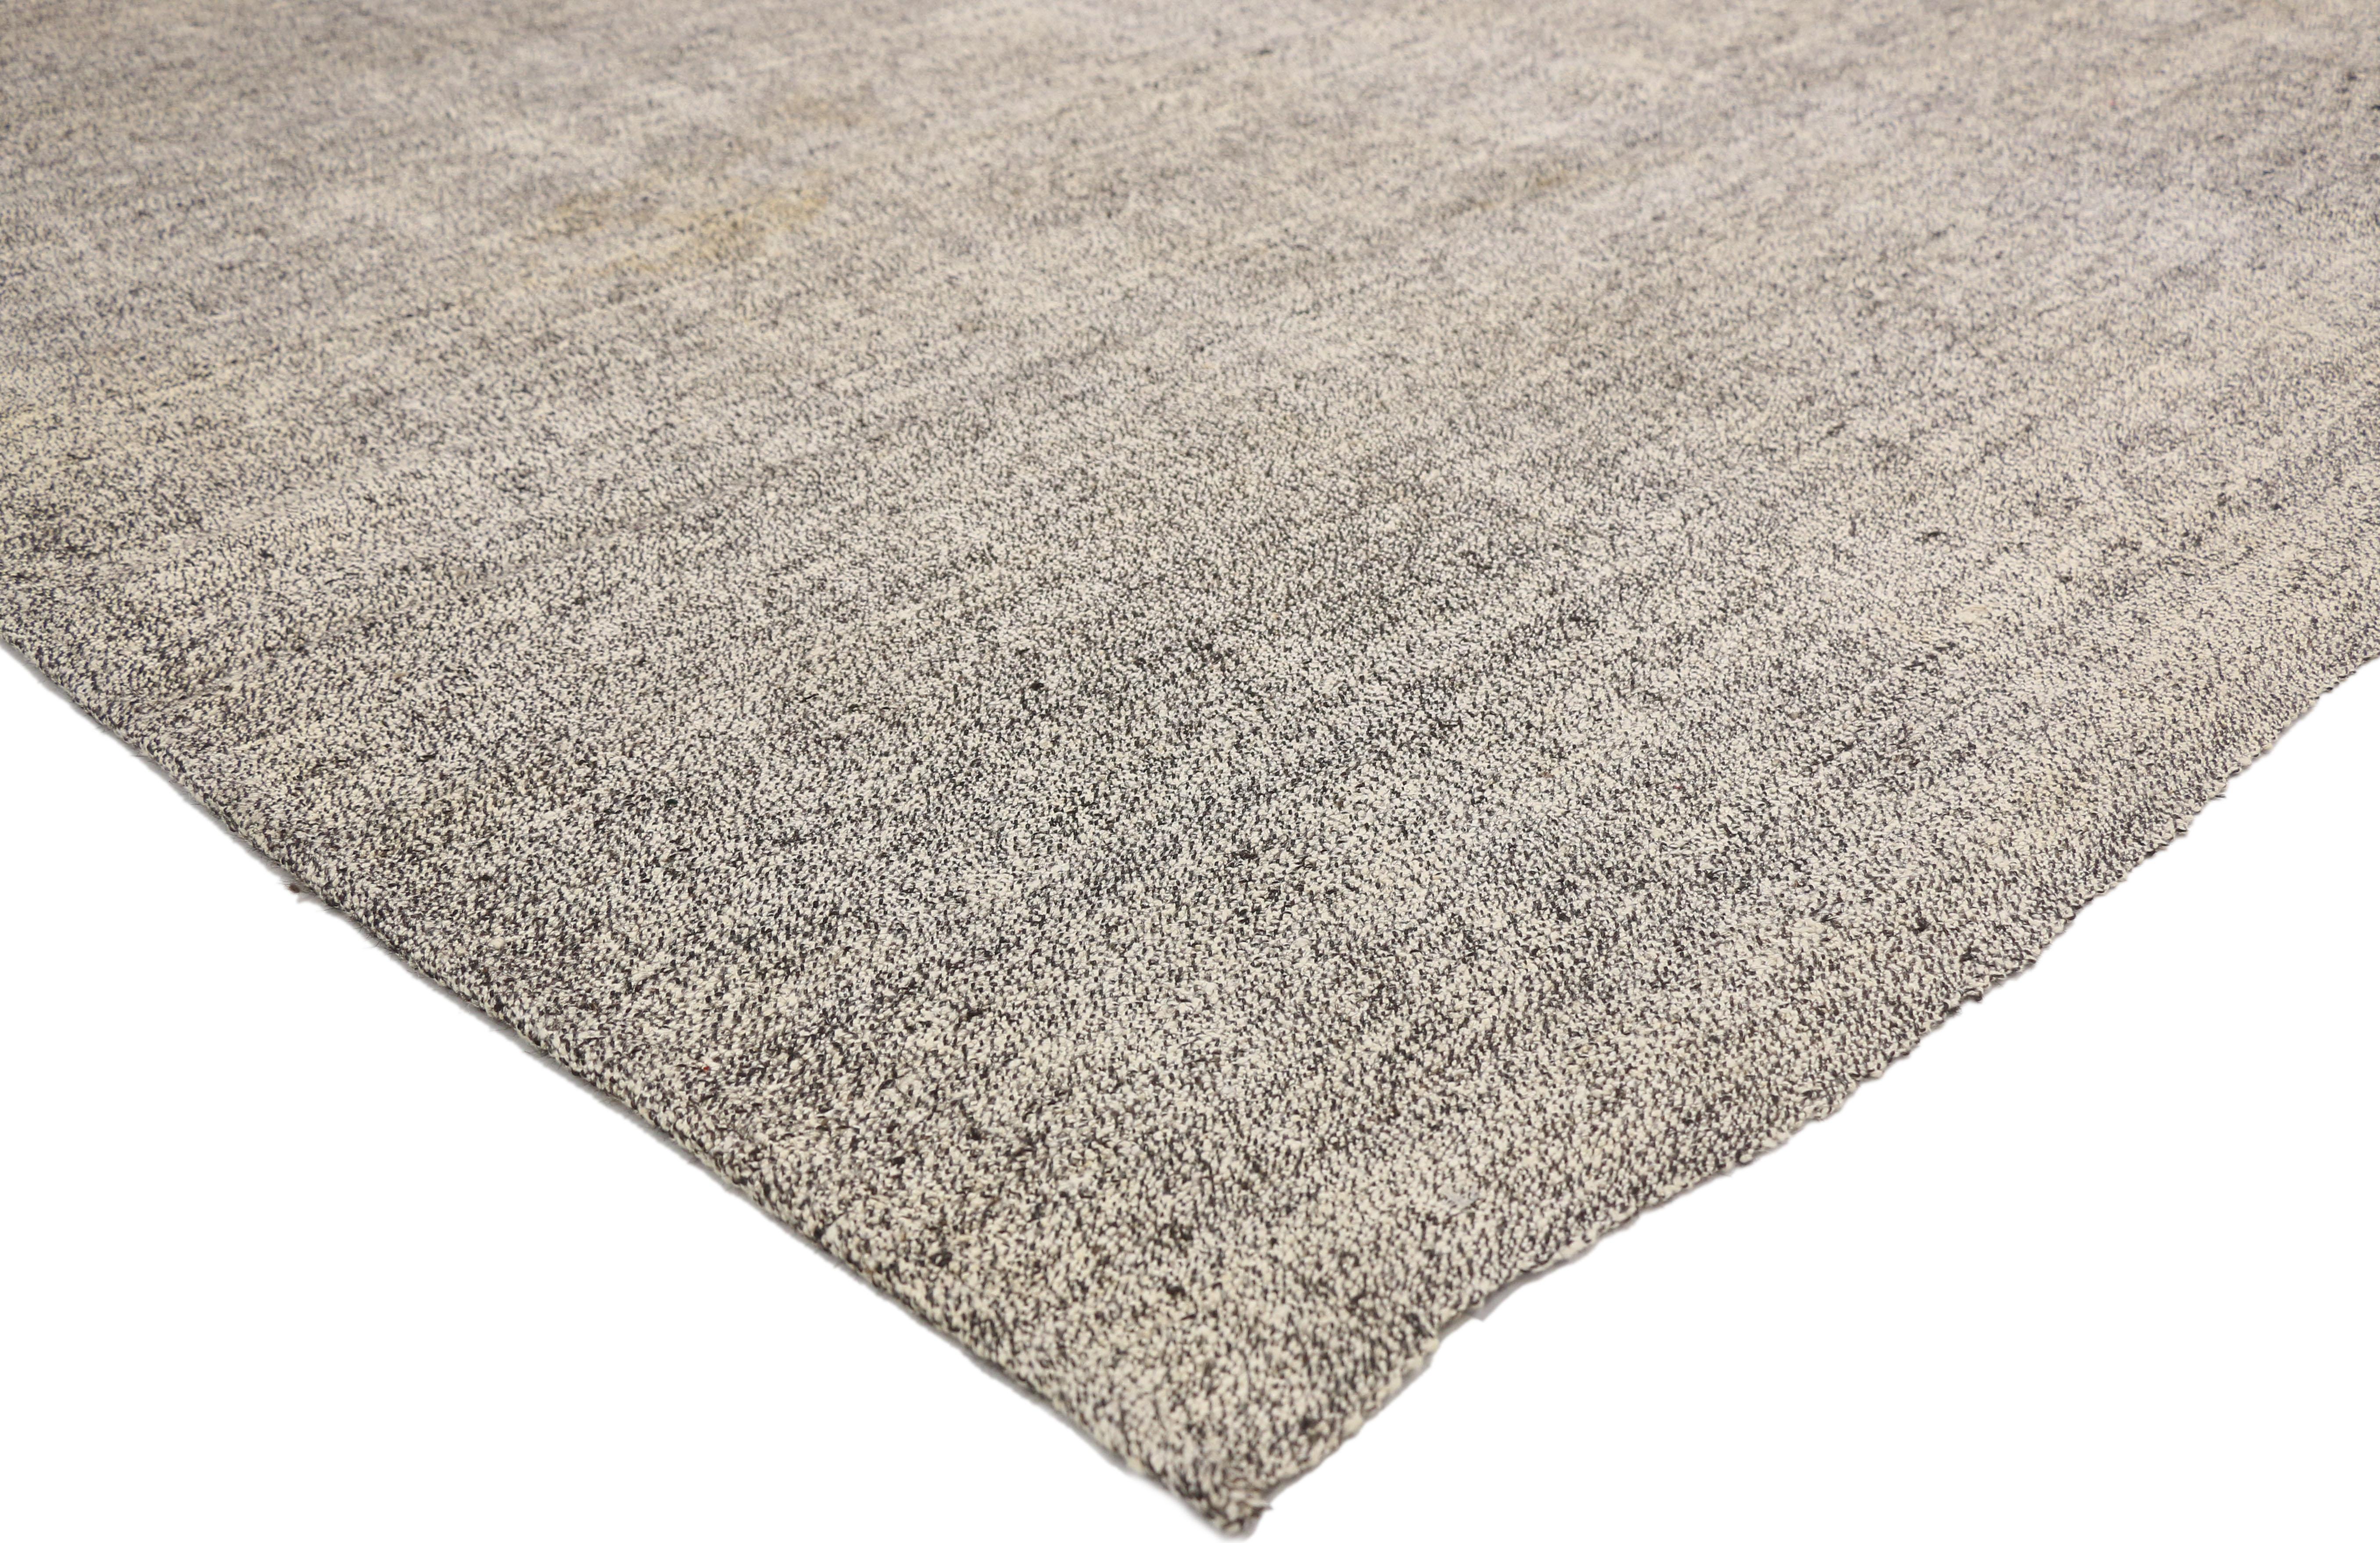 74139 Vintage Turkish Kilim Rug with Minimalist Industrial Style, Flatweave Kilim Rug 07’00 x 10’02. This vintage Turkish kilim rug is a beautiful marriage of modern industrial and fresh, contemporary form. Natural wool with goat hair and hemp